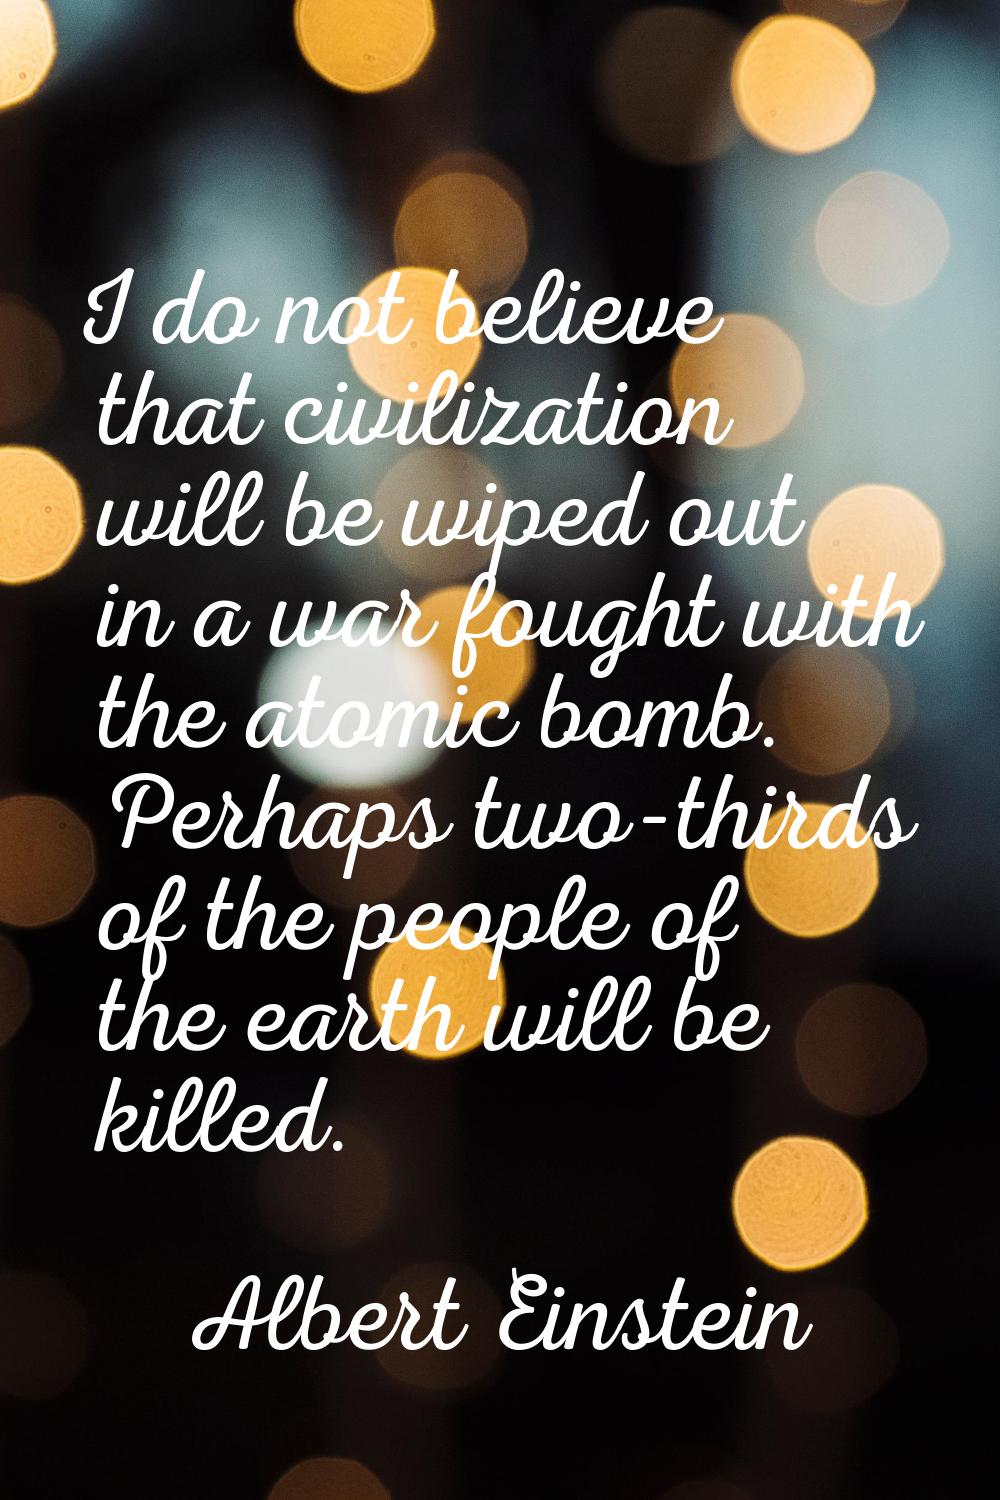 I do not believe that civilization will be wiped out in a war fought with the atomic bomb. Perhaps 